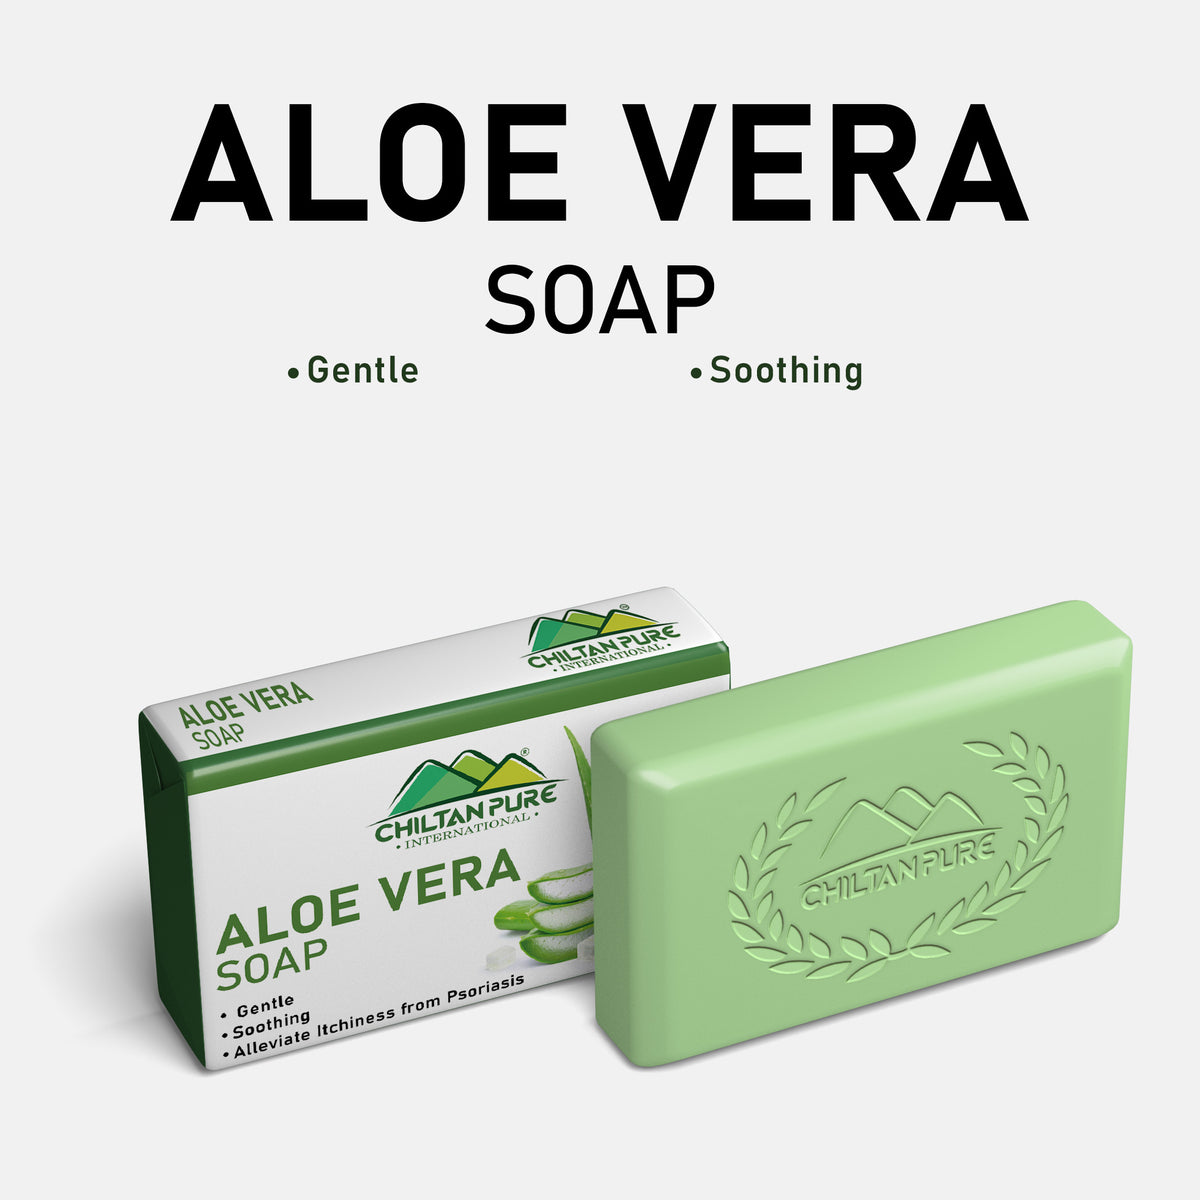 Aloe vera soap - Gentle, soothing & alleviate itchiness from psoriasis